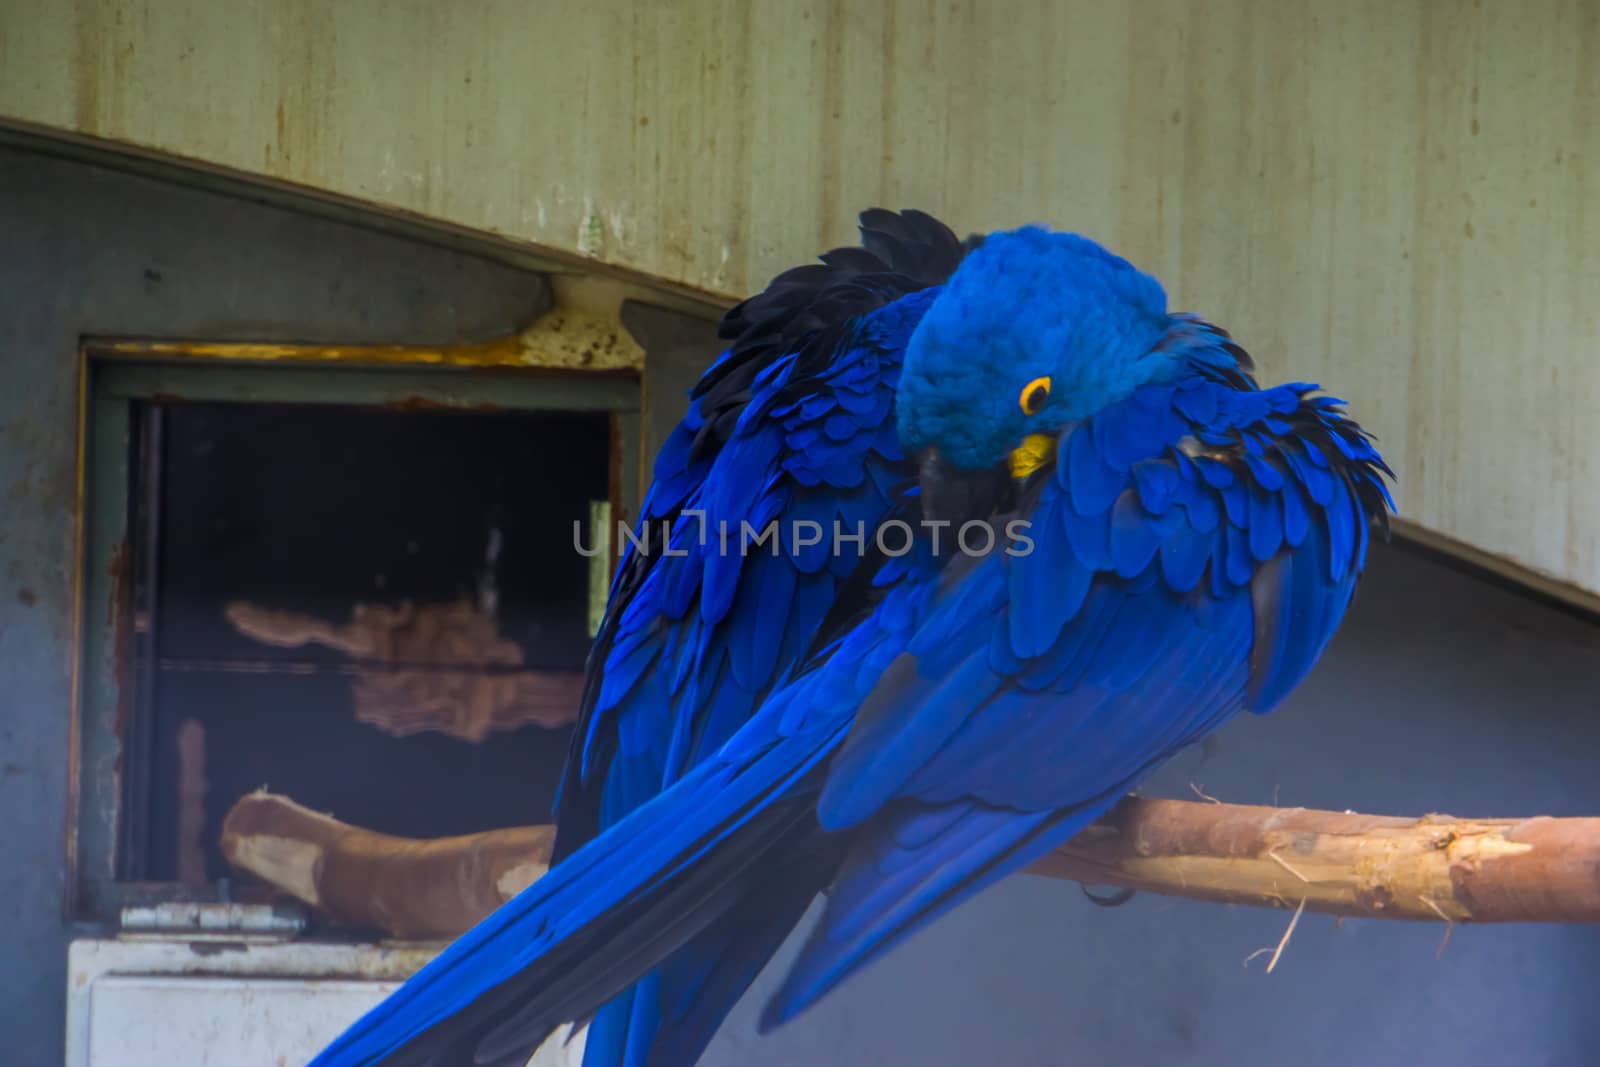 closeup of a hyacinth macaw preening its feathers, typical bird behavior, tropical blue parrot specie from South America